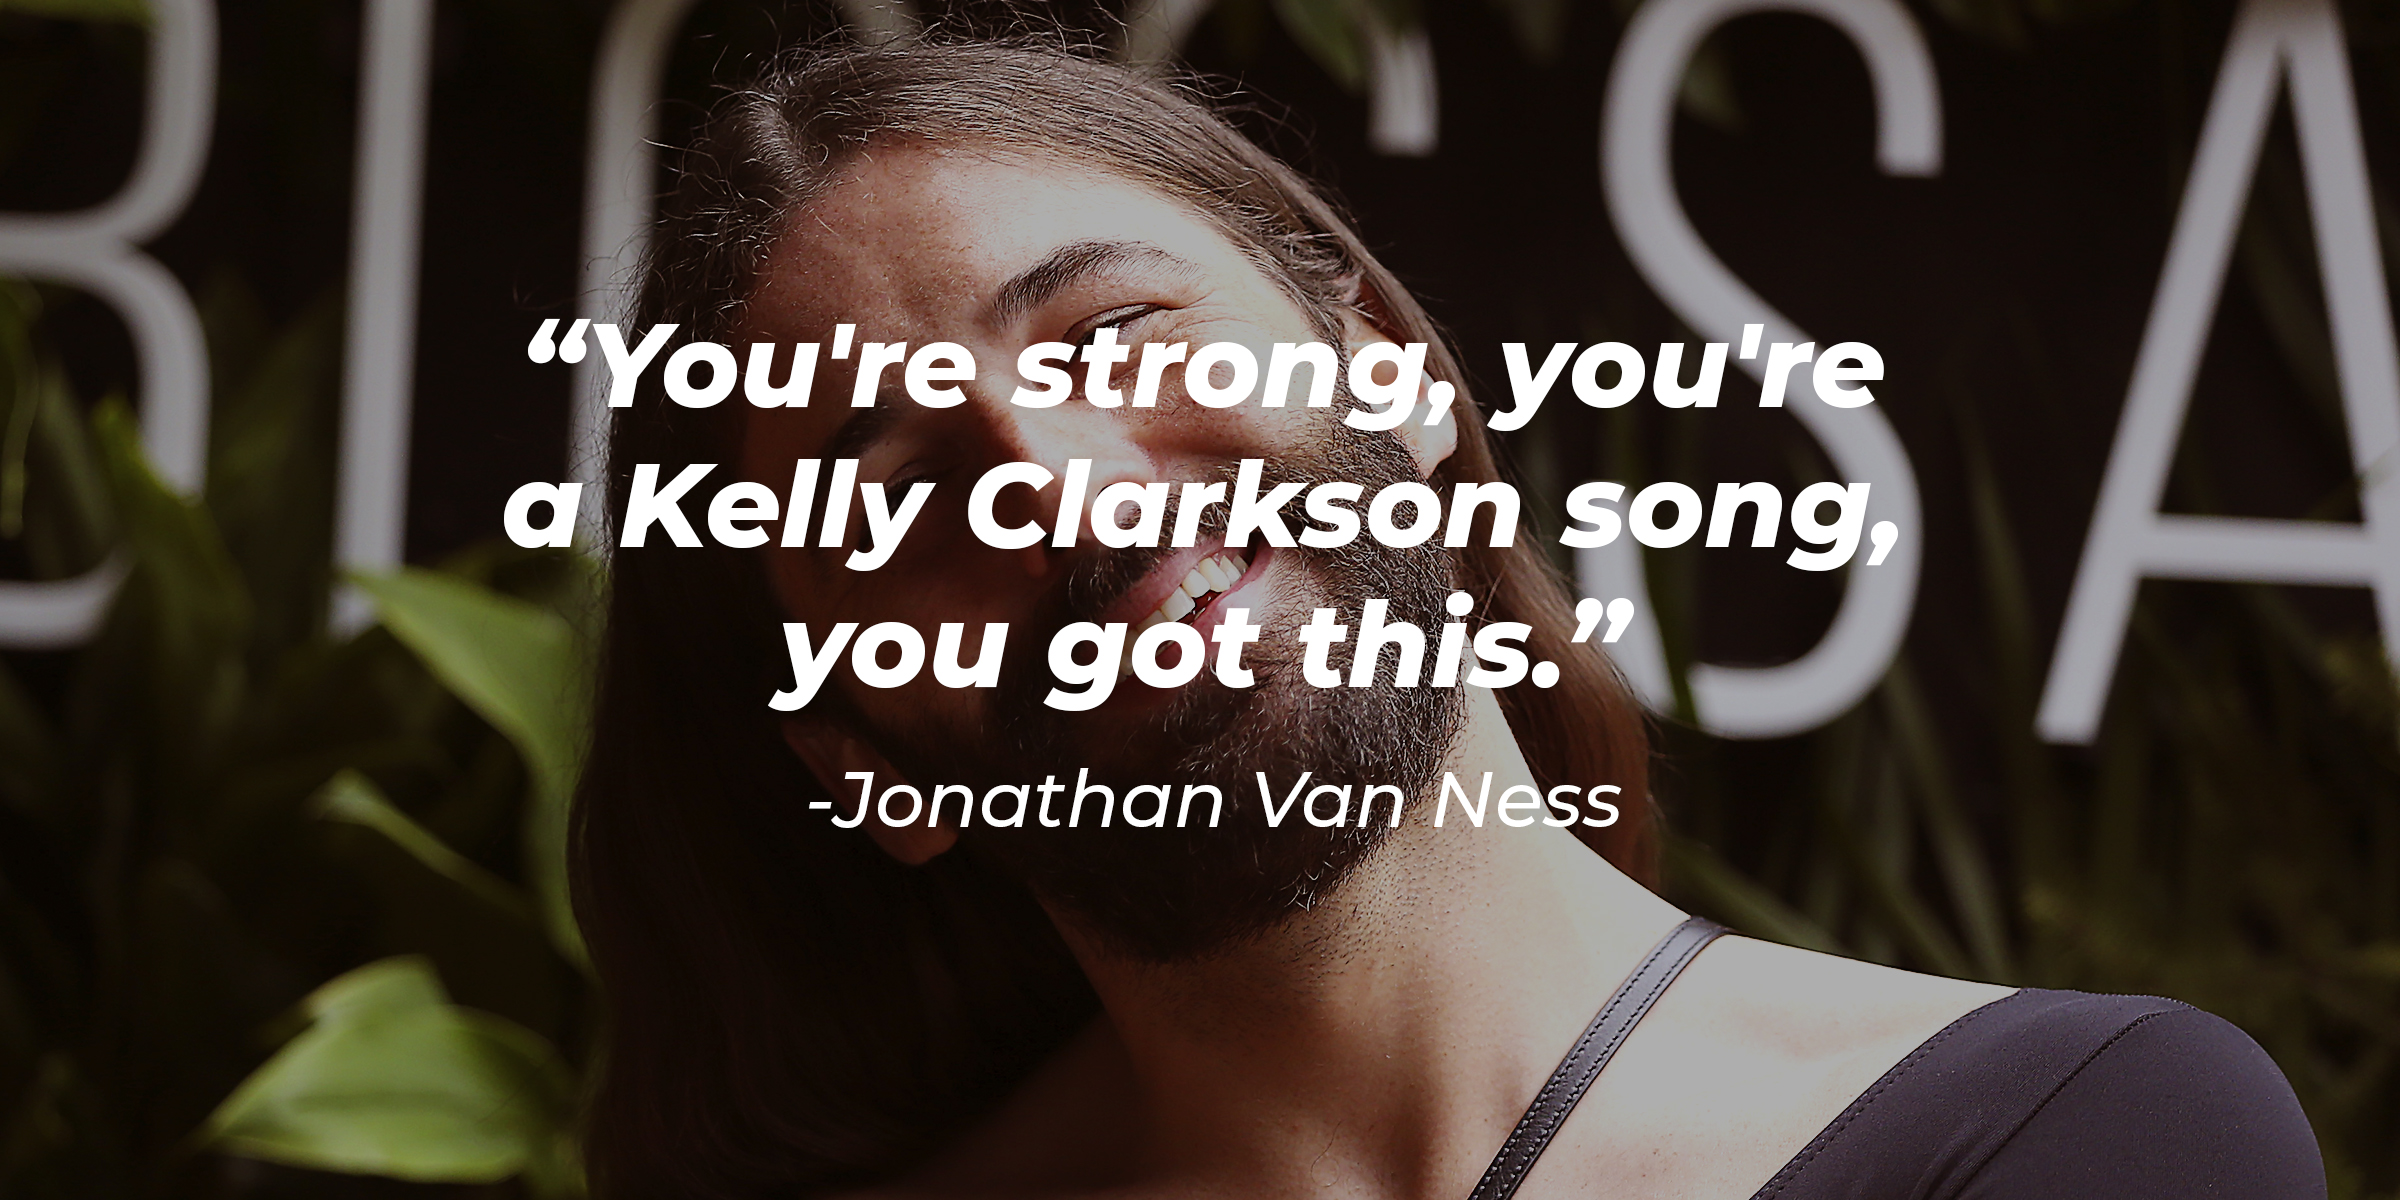 Jonathan Van Ness’ quote: "You're strong, you're a Kelly Clarkson song, you got this." | Source: Getty Images